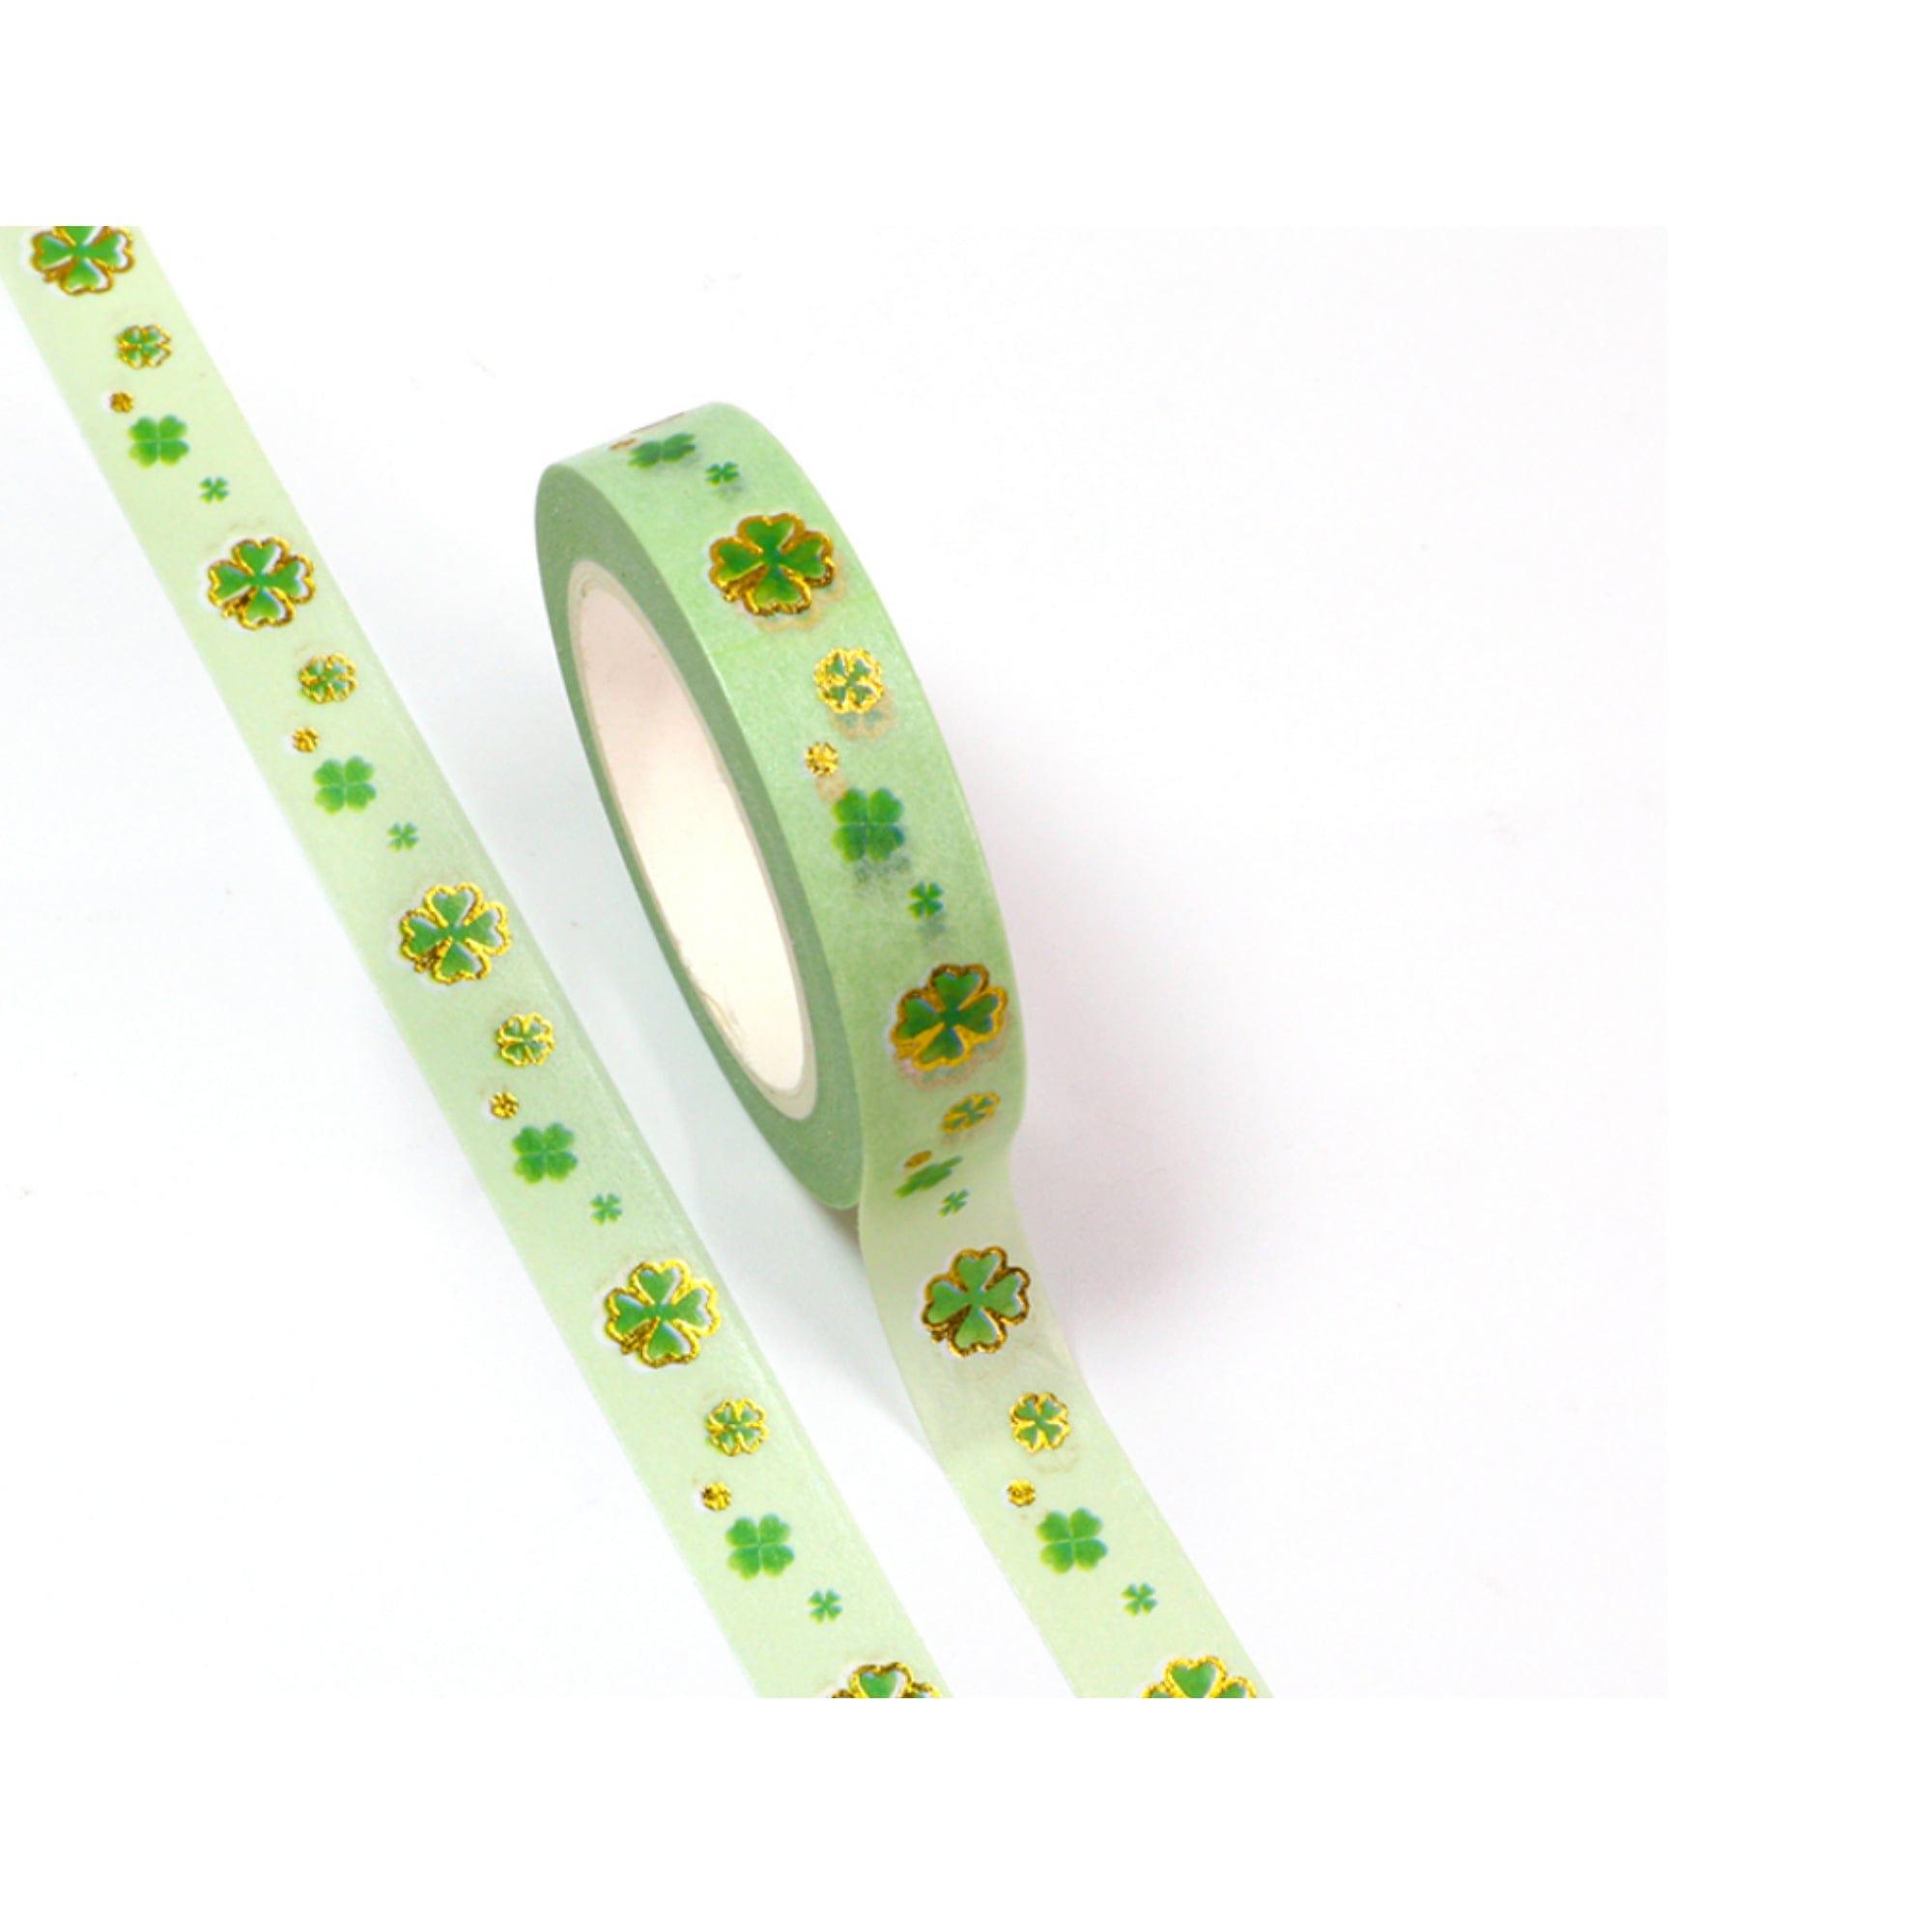 TW Collection Shamrocks Gold Foiled Washi Tape by SSC Designs - 10mm x 30 Feet